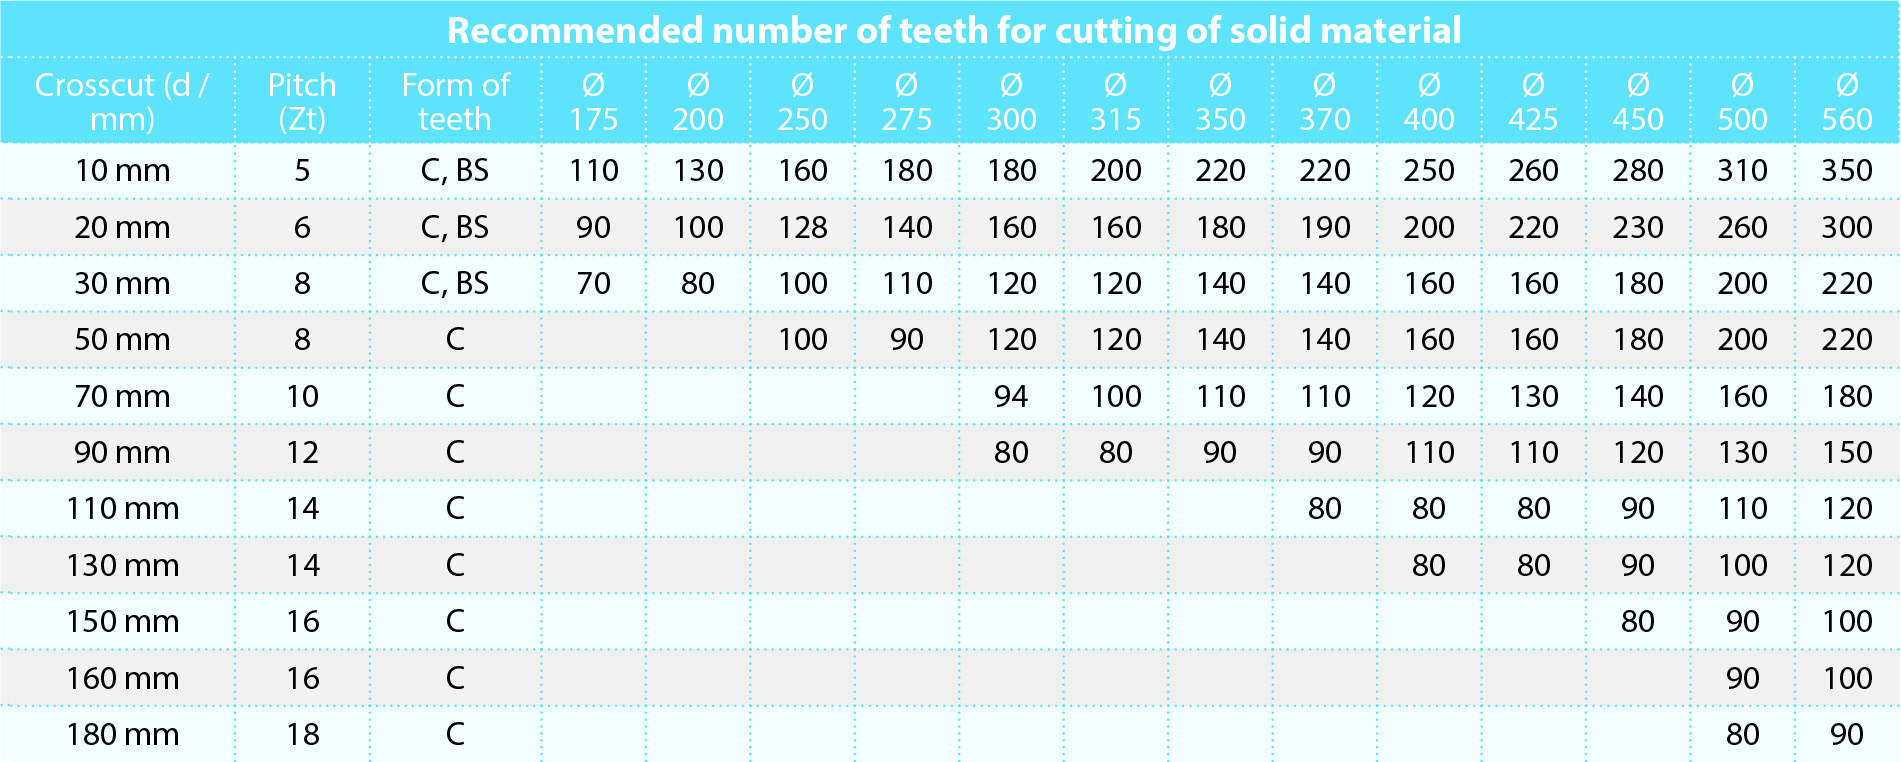 Teeth number + Toof form we recommend for cutting solid material